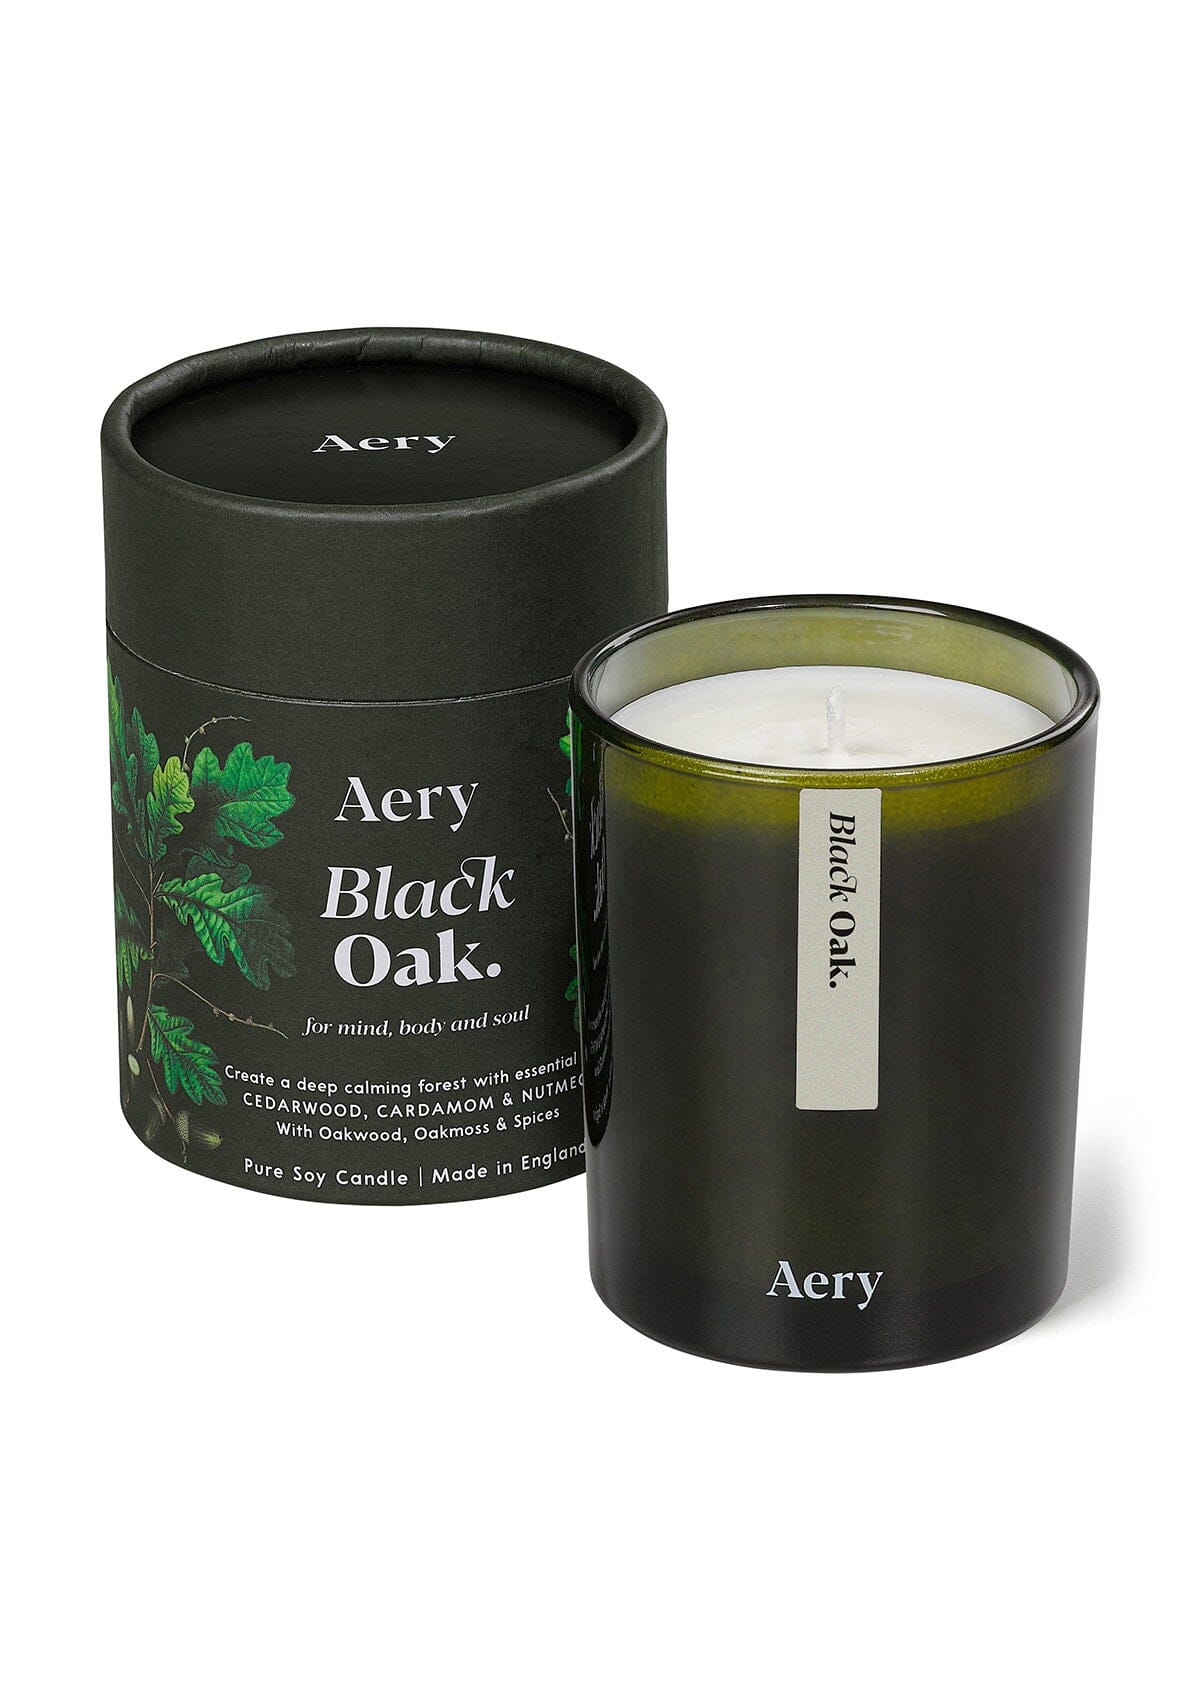 Green Black Oak glass scented candle displayed next to product packaging  on white background 